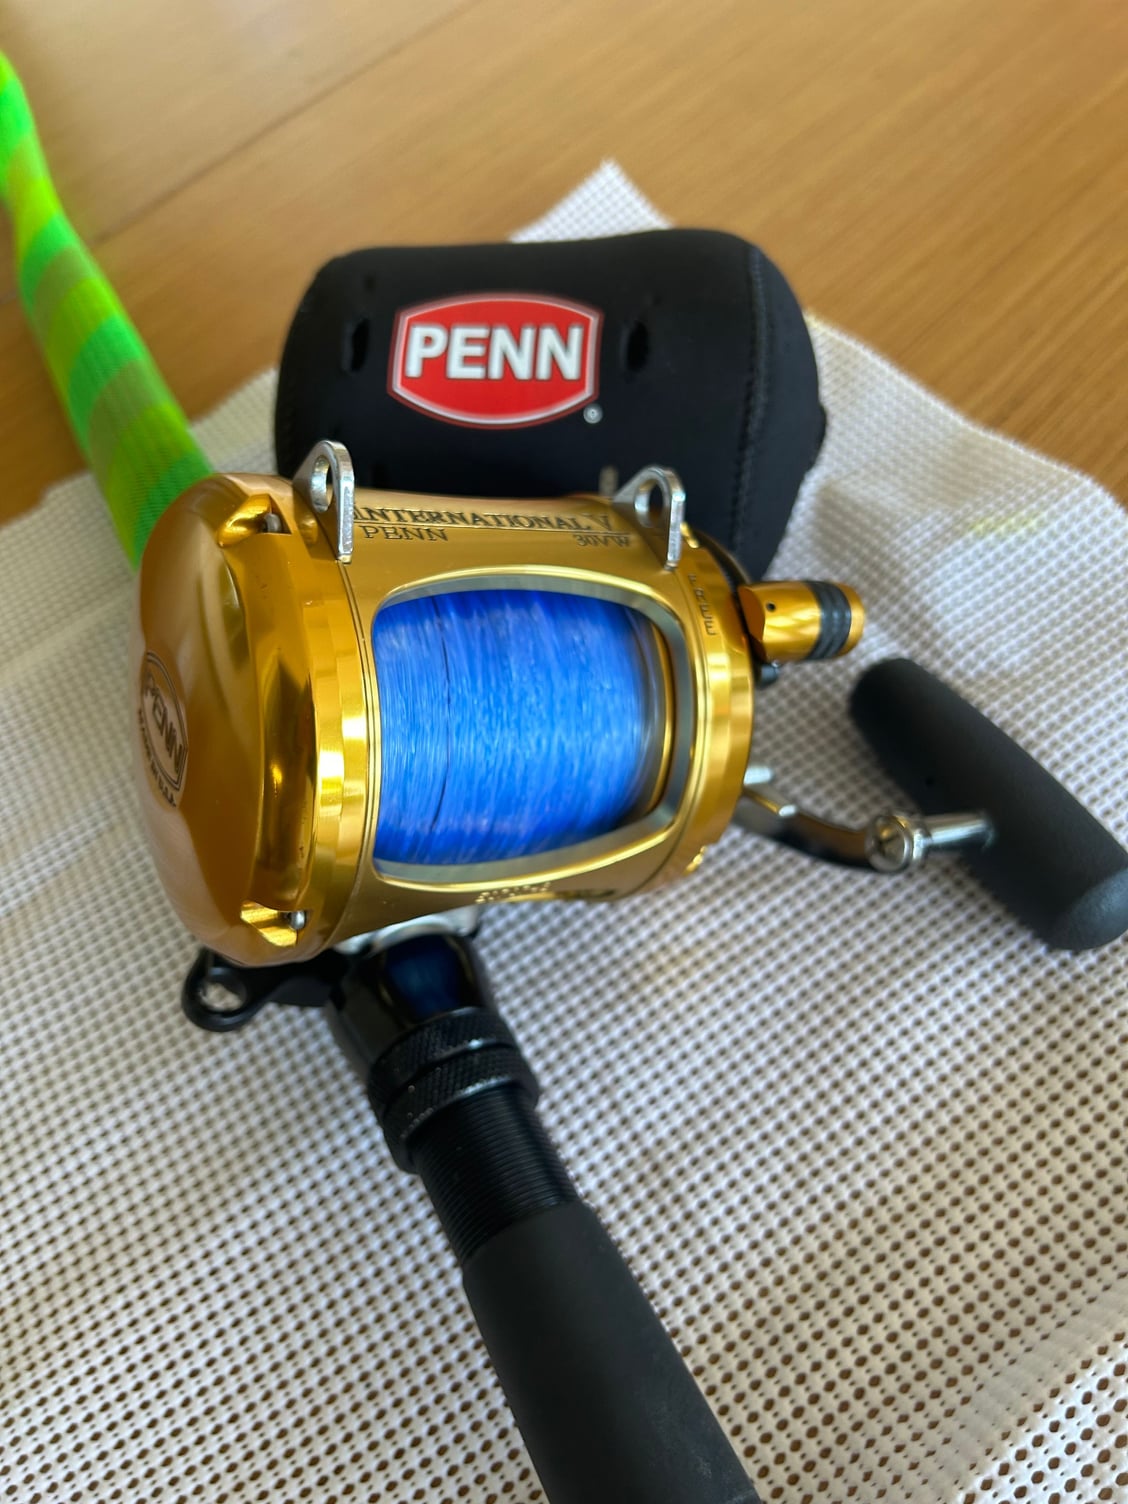 Penn International 30 Reels For Sale - The Hull Truth - Boating